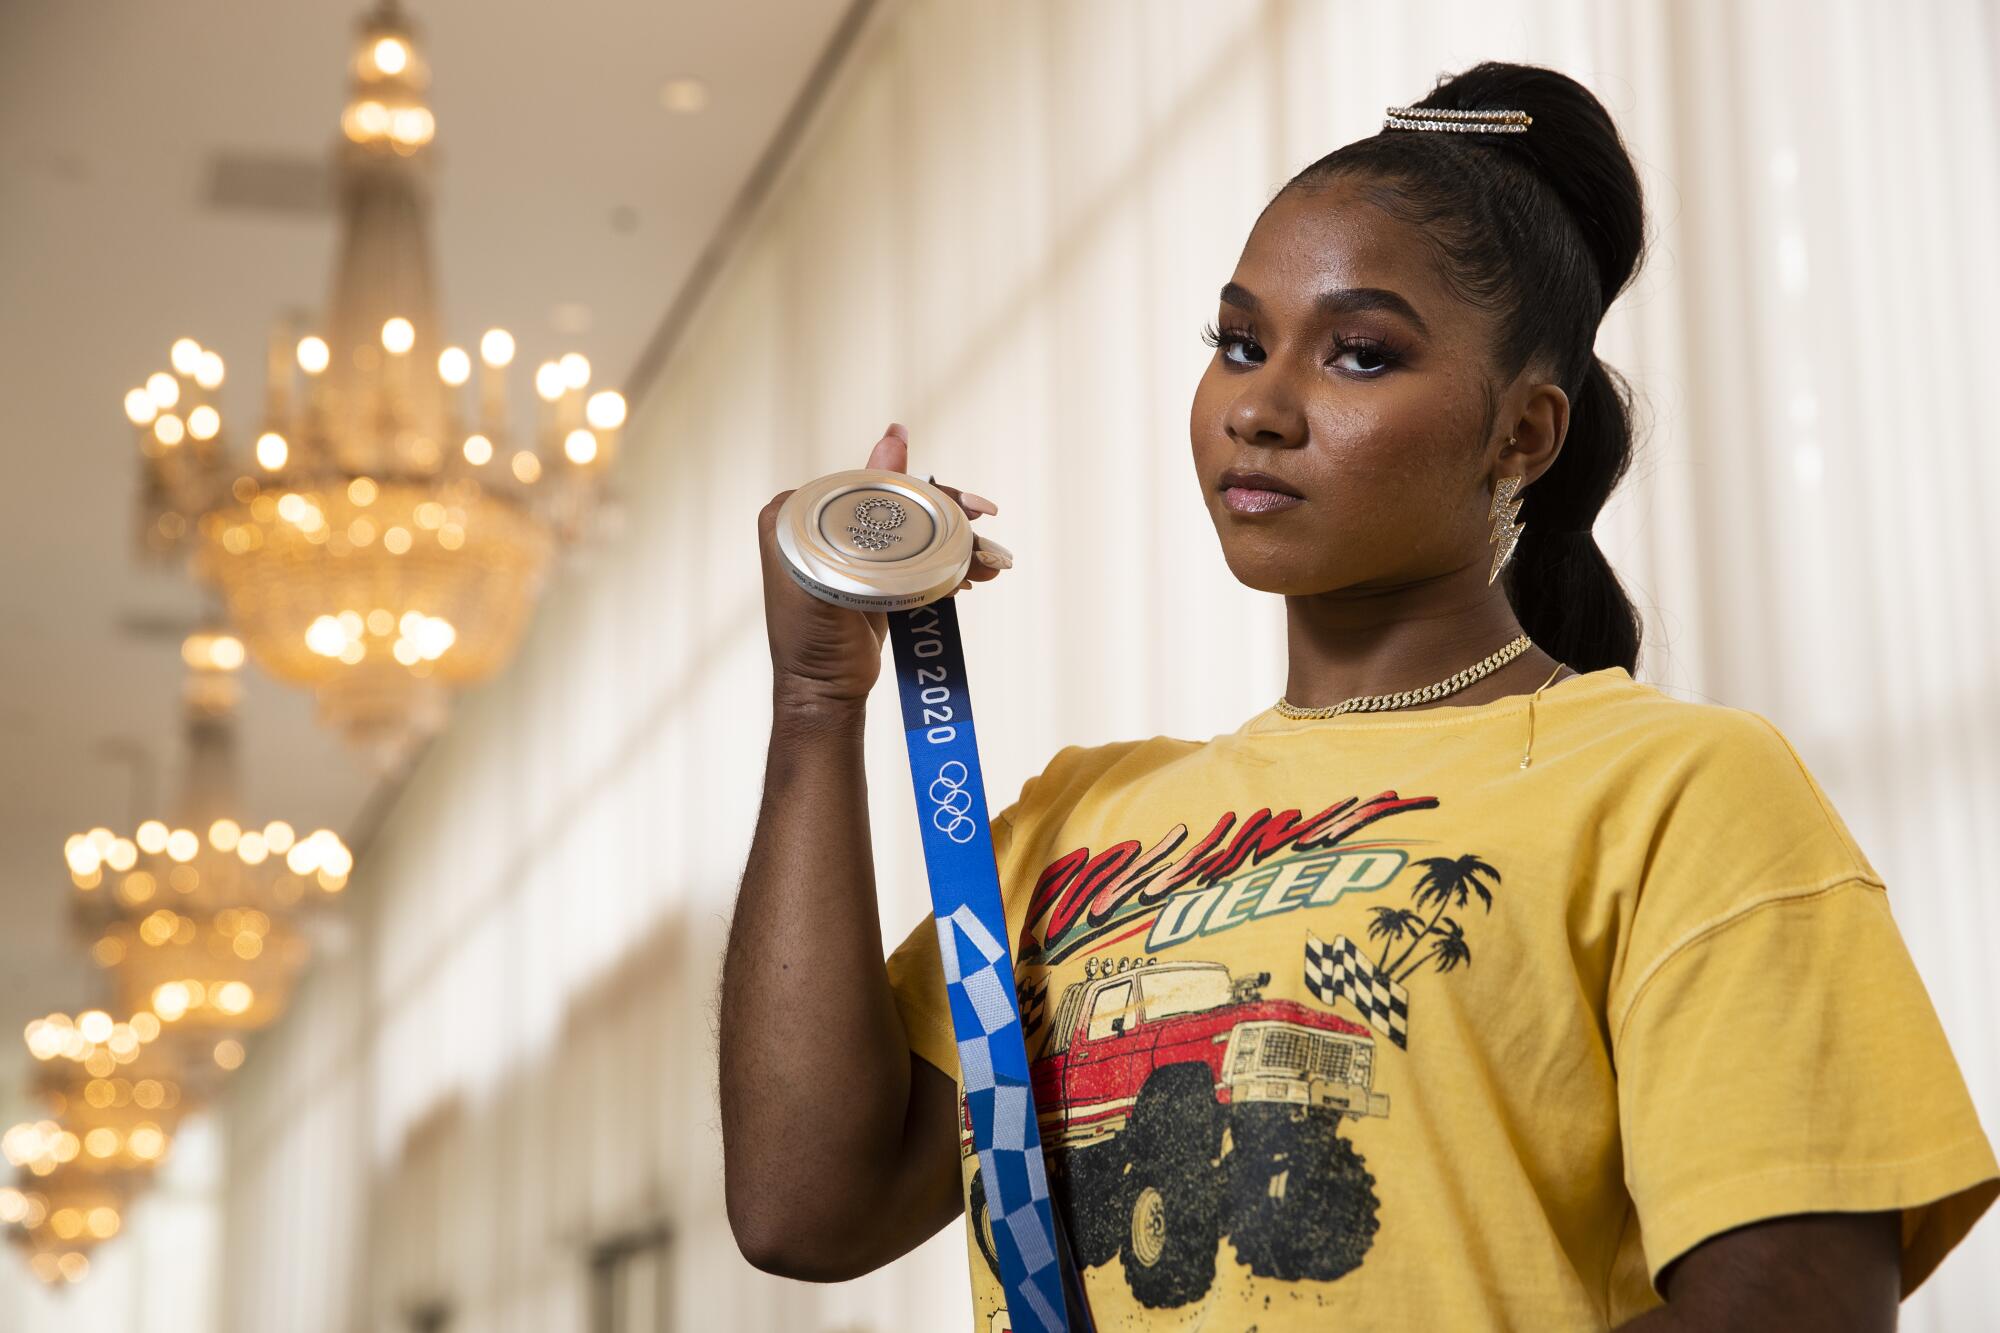 UCLA gymnast Jordan Chiles holds the Olympic silver medal she won at the Tokyo Olympics in 2021.